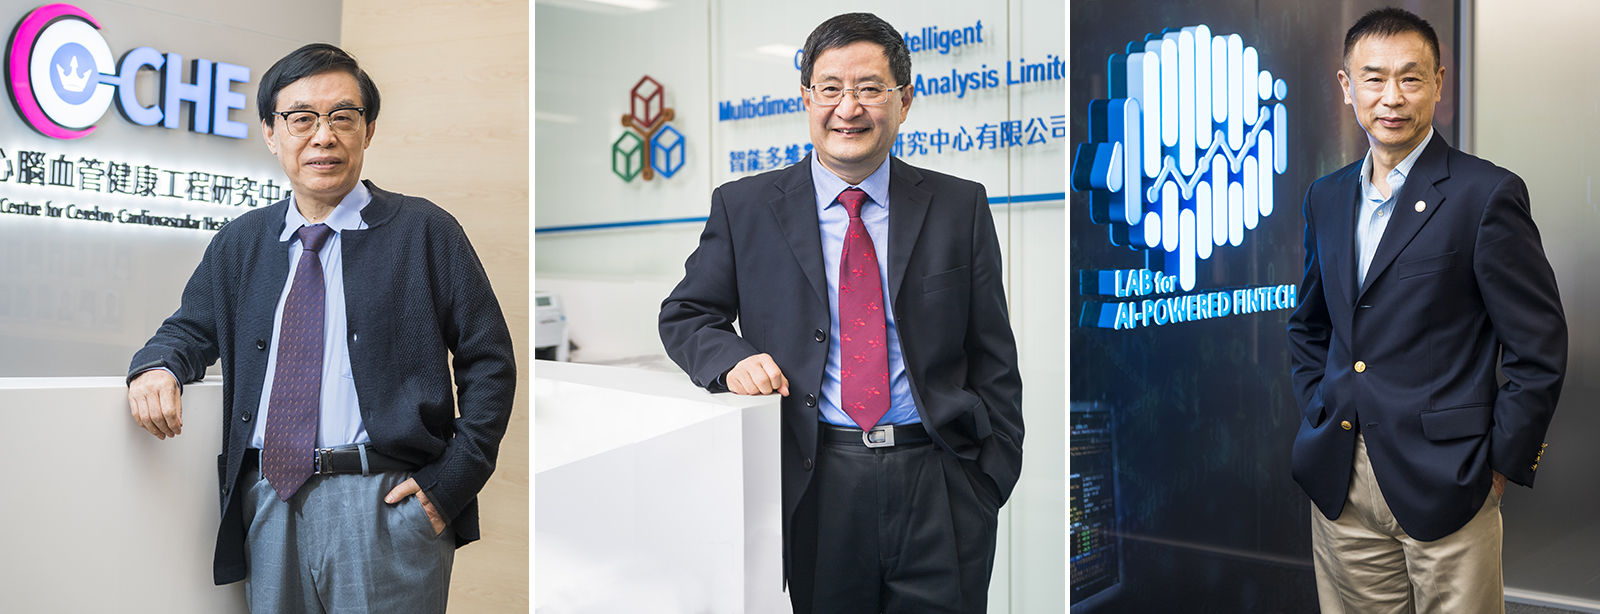 (From left) Professor Zhang Yuanting, Director of COCHE; Professor Yan Hong, Director of CIMDA; Professor Yan Houmin, Director of AIFT.